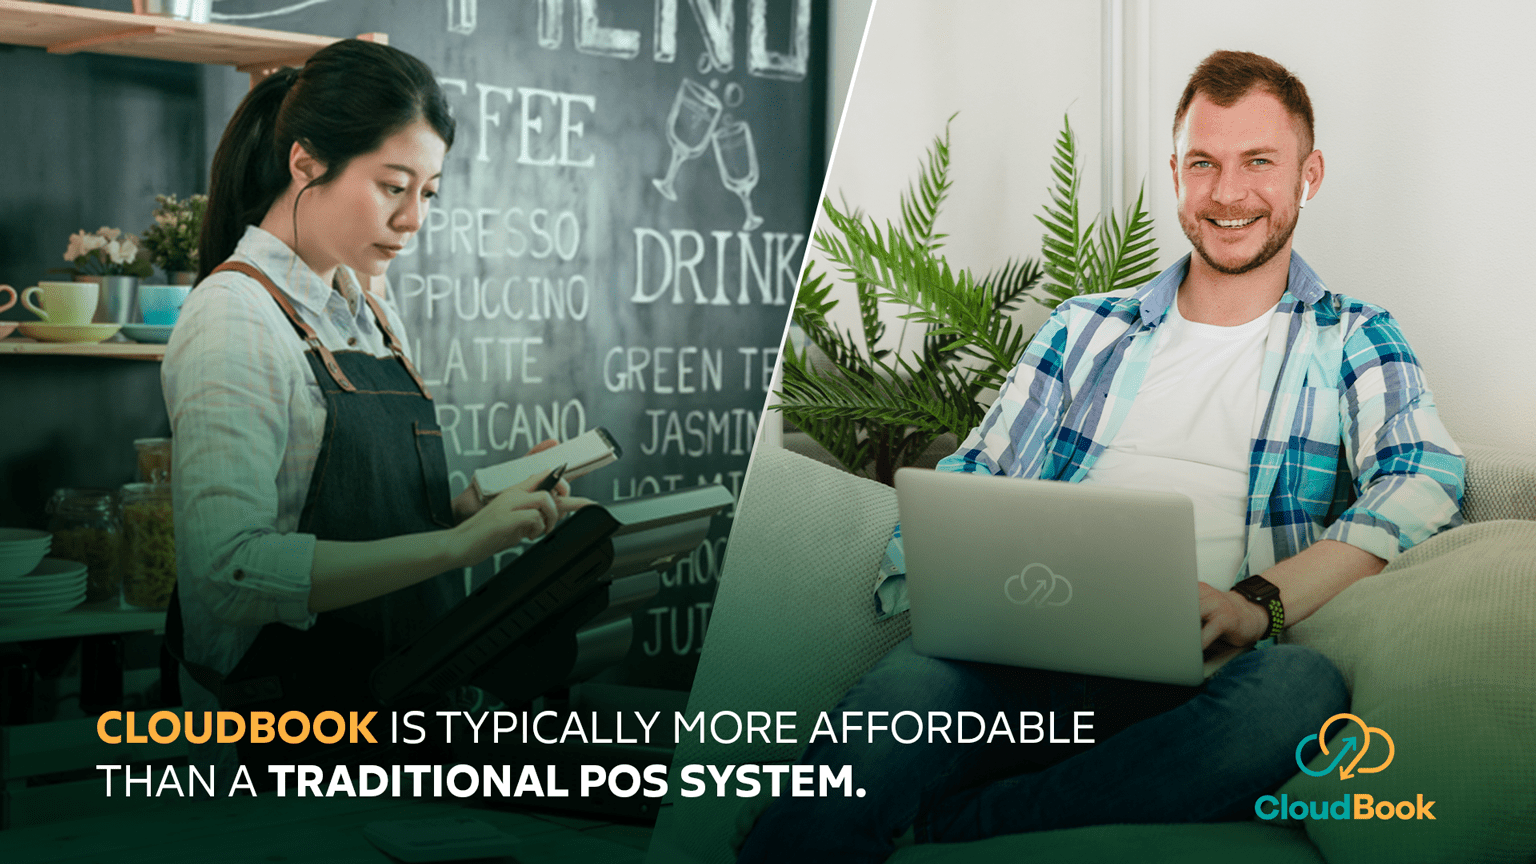 CloudBook is typically more affordable than a traditional POS system